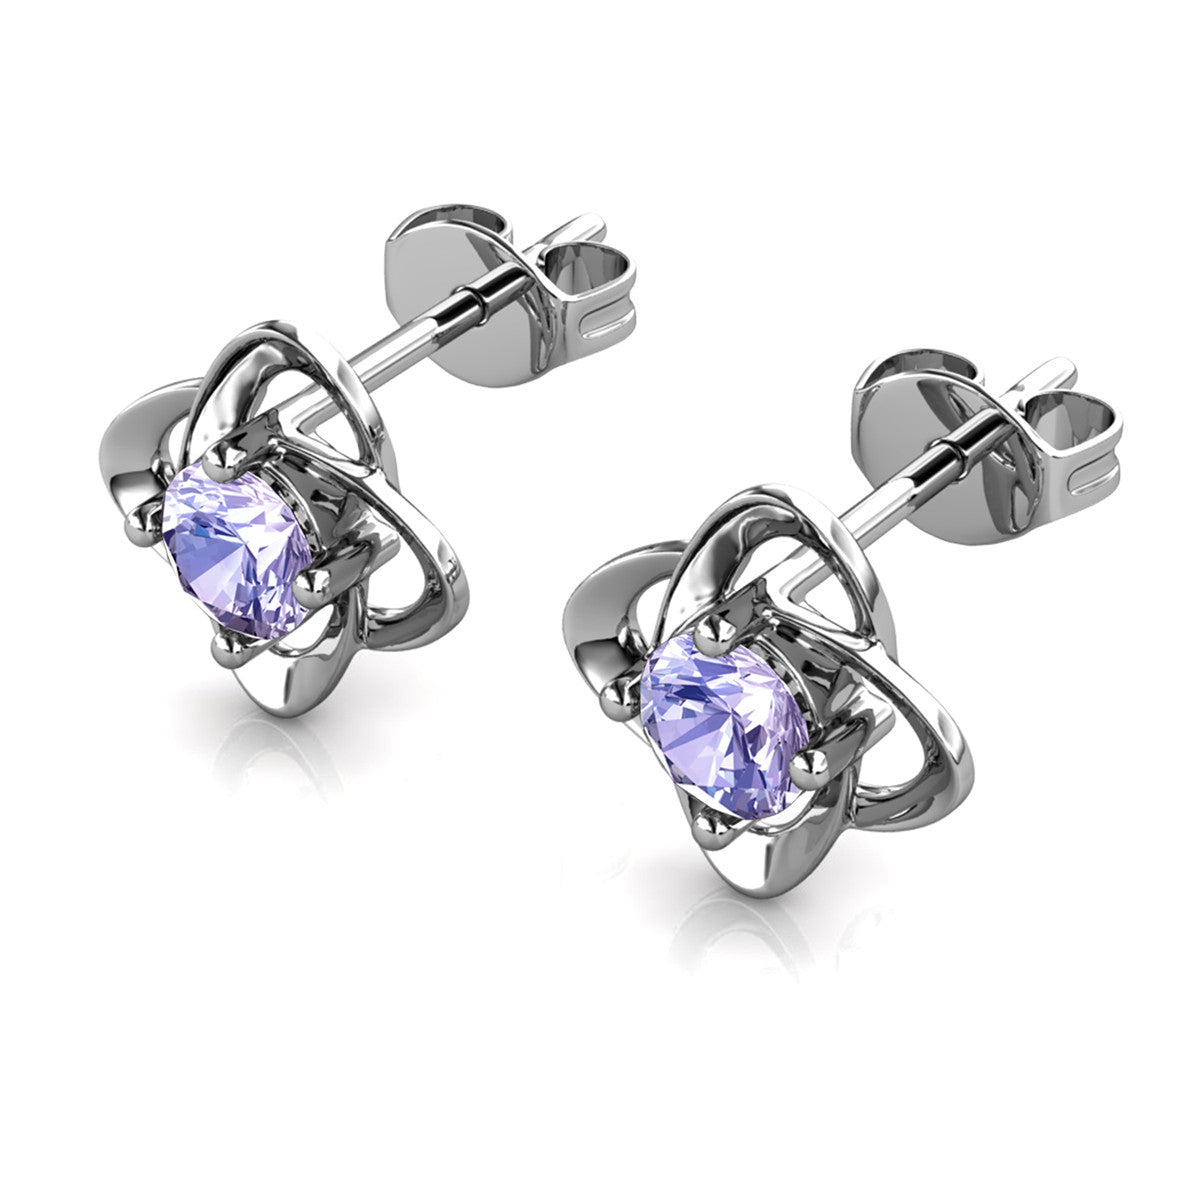 Infinity June Birthstone Alexandrite Earrings, 18k White Gold Plated Silver Birthstone Earrings with Crystals